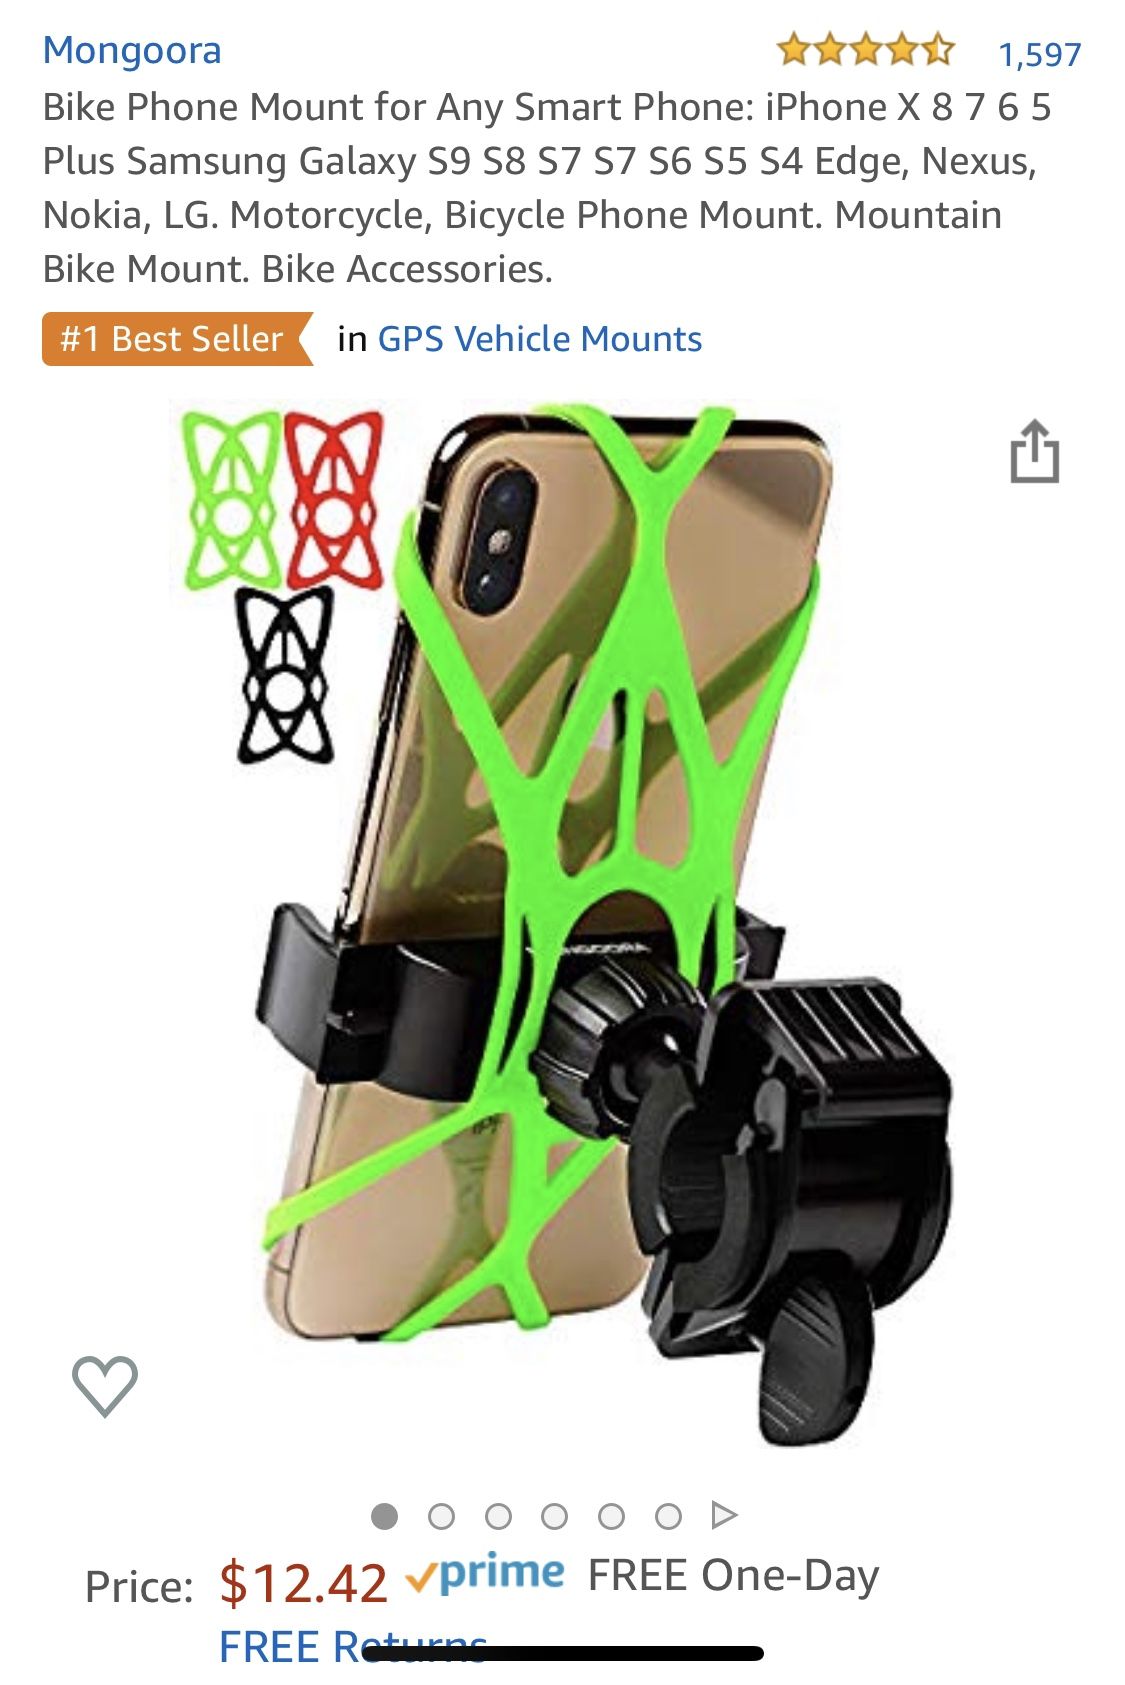 Bike Phone Mount for Any Smart Phone. Motorcycle, mountain Bicycle. Bike Accessories. GPS.